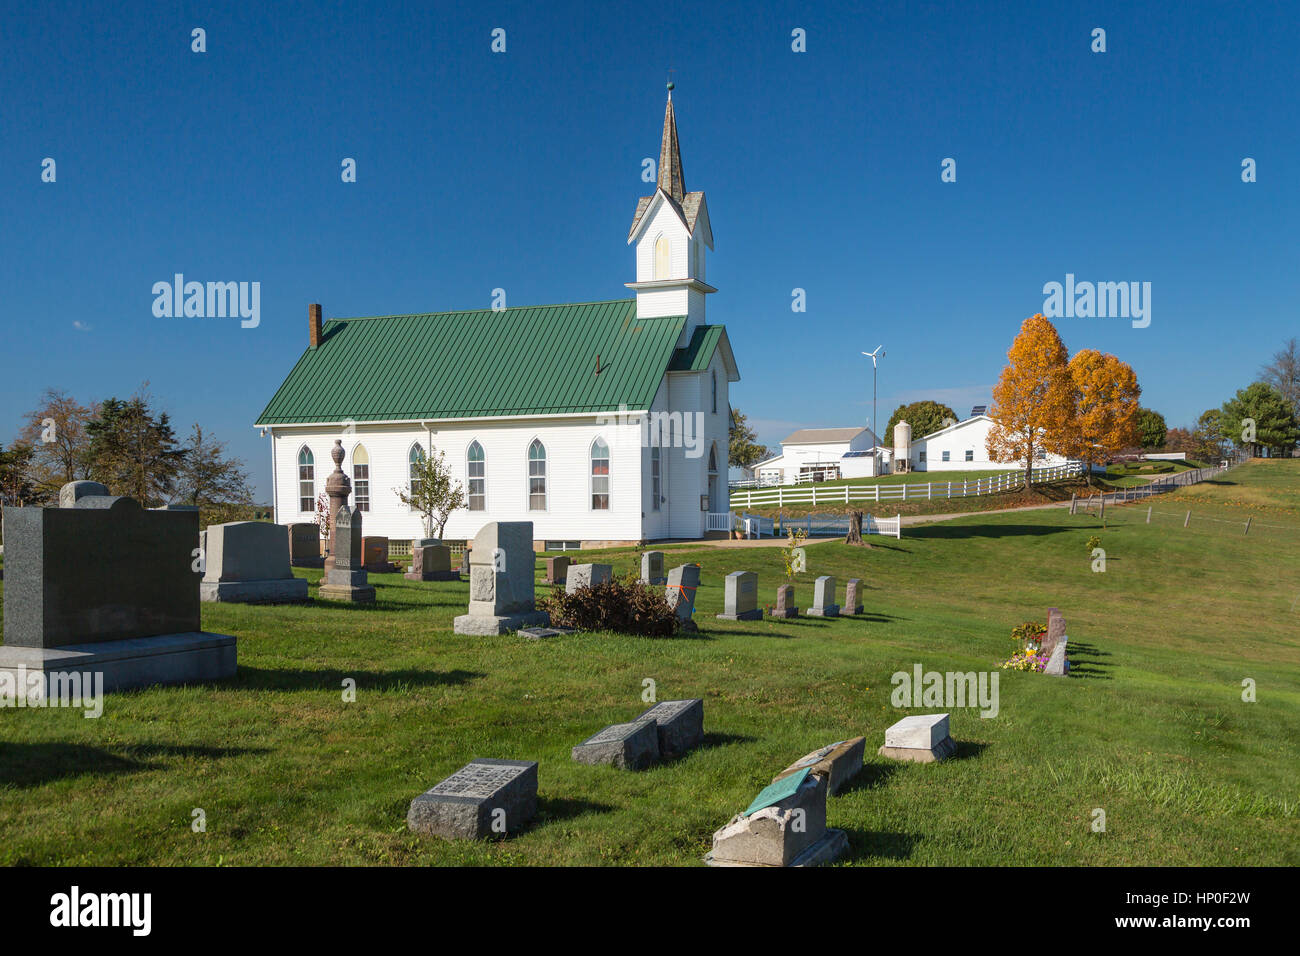 Le Zion Church of Christ, New Bedford dans Coshocton County, Ohio, USA. Banque D'Images